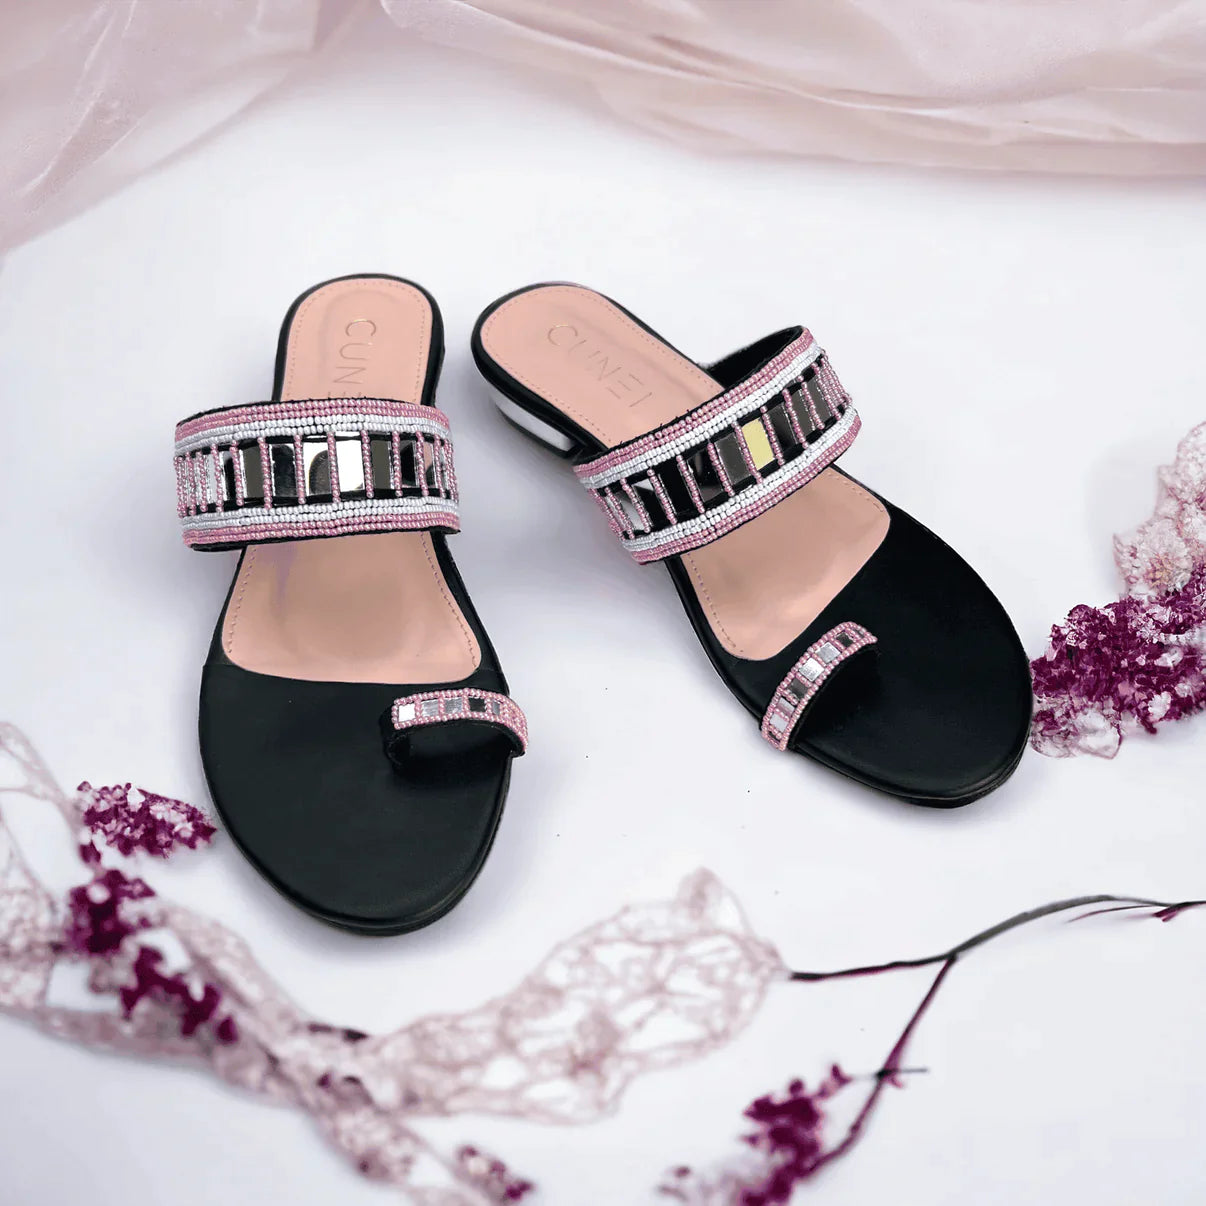 Embroidered Shoes Womens: 7 Must-Have Designs for Every Wardrobe